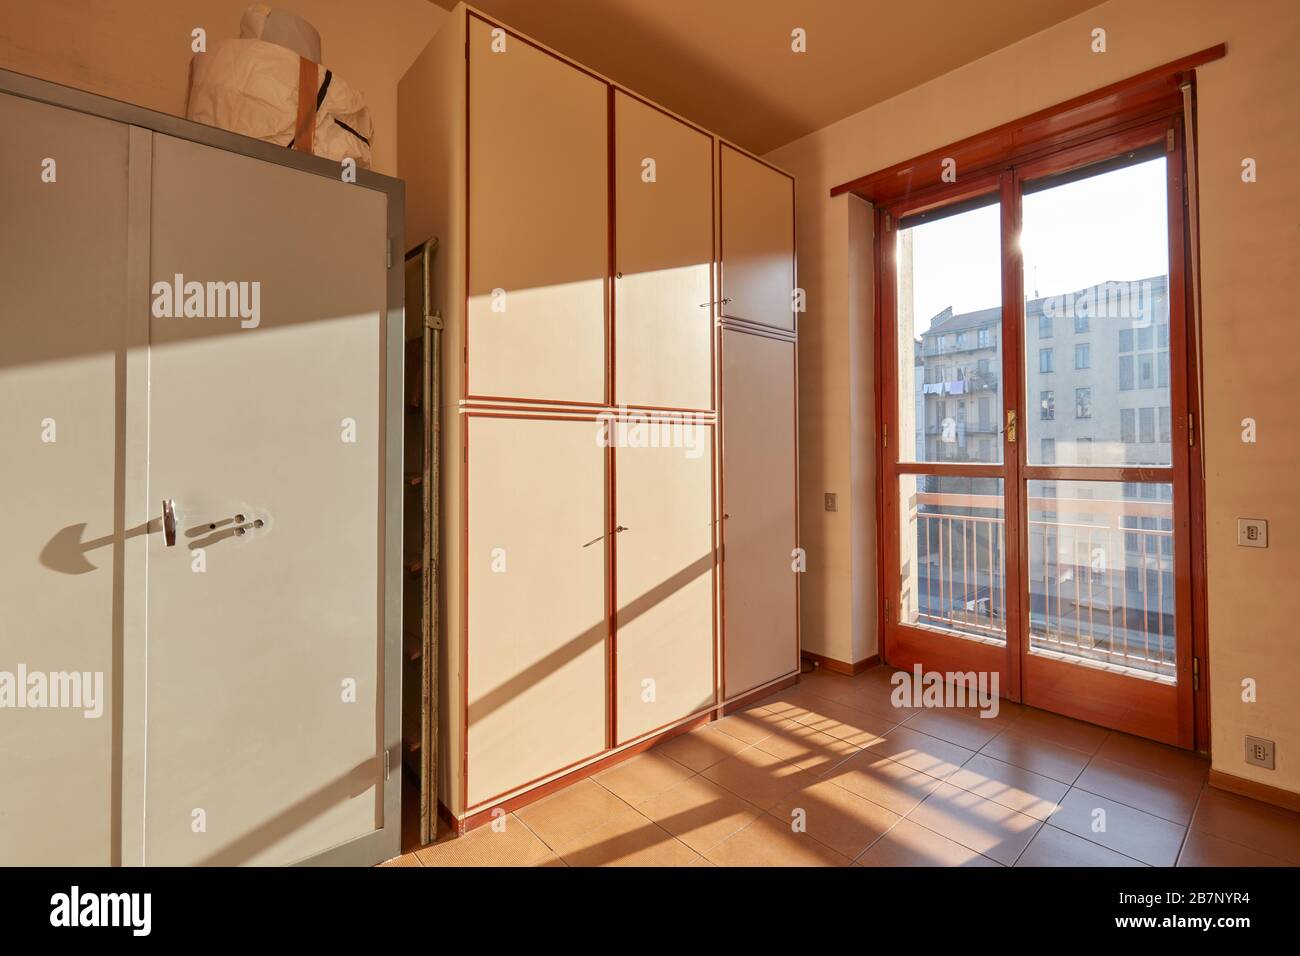 Sunny room with wardrobe and safe in apartment interior Stock Photo